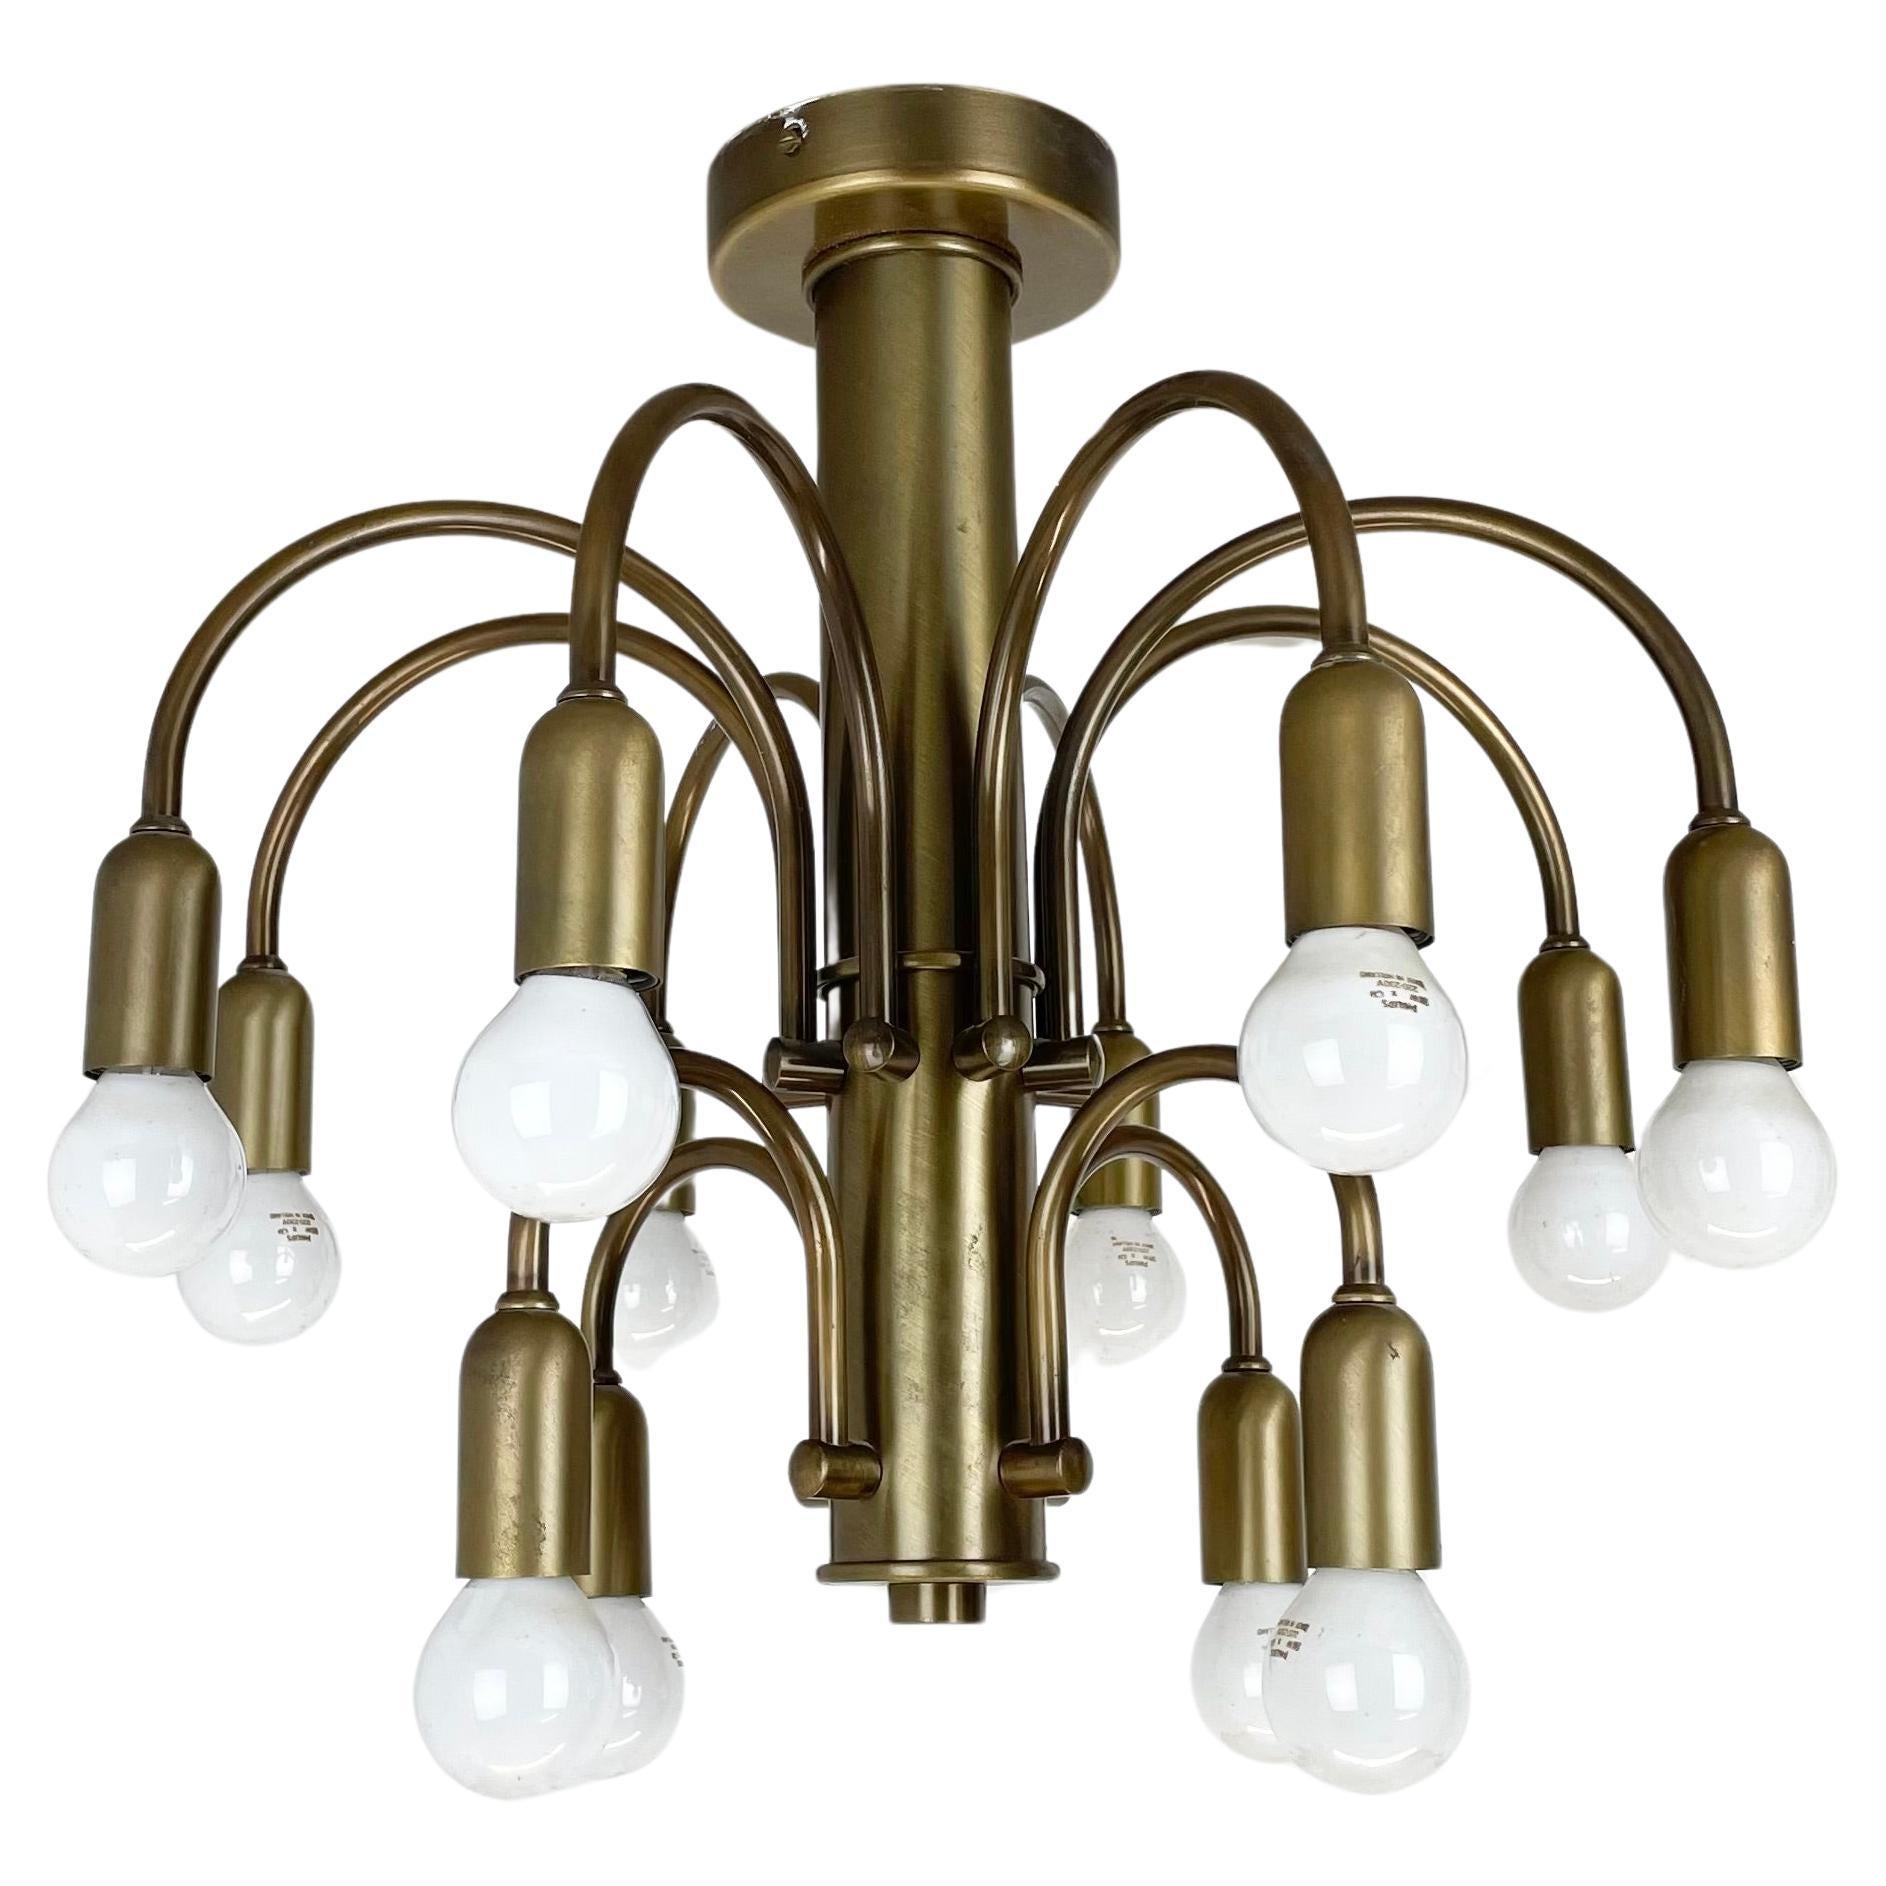 large 12-armed solid Brass ceiling light Chandelier by WKR Lights, Germany 1970s